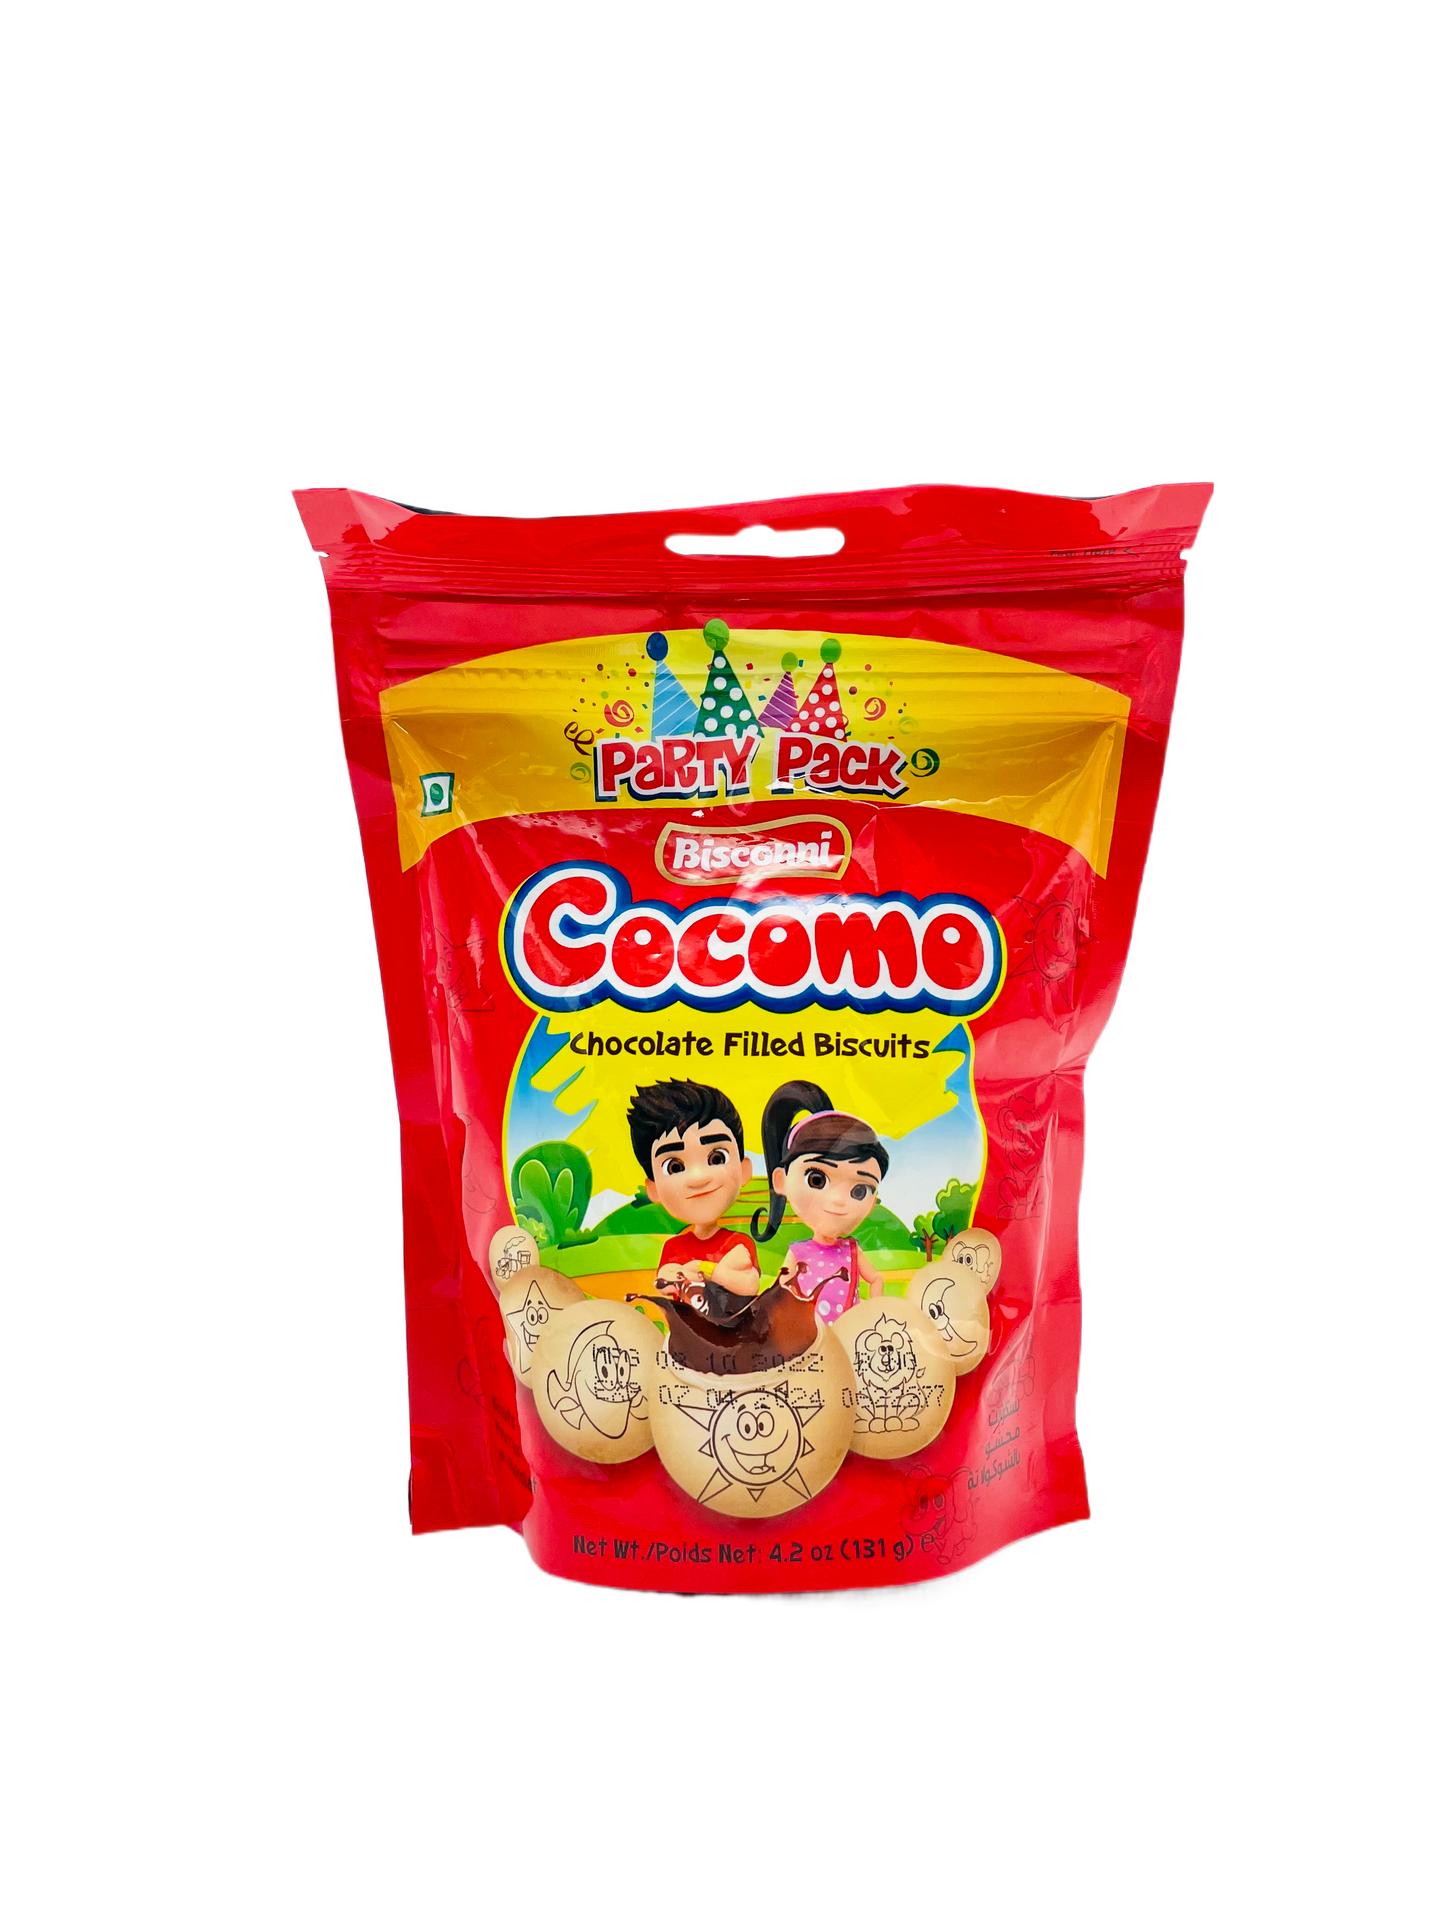 Bisconni Cocomo Choc Filled Biscuits Pouch 131g